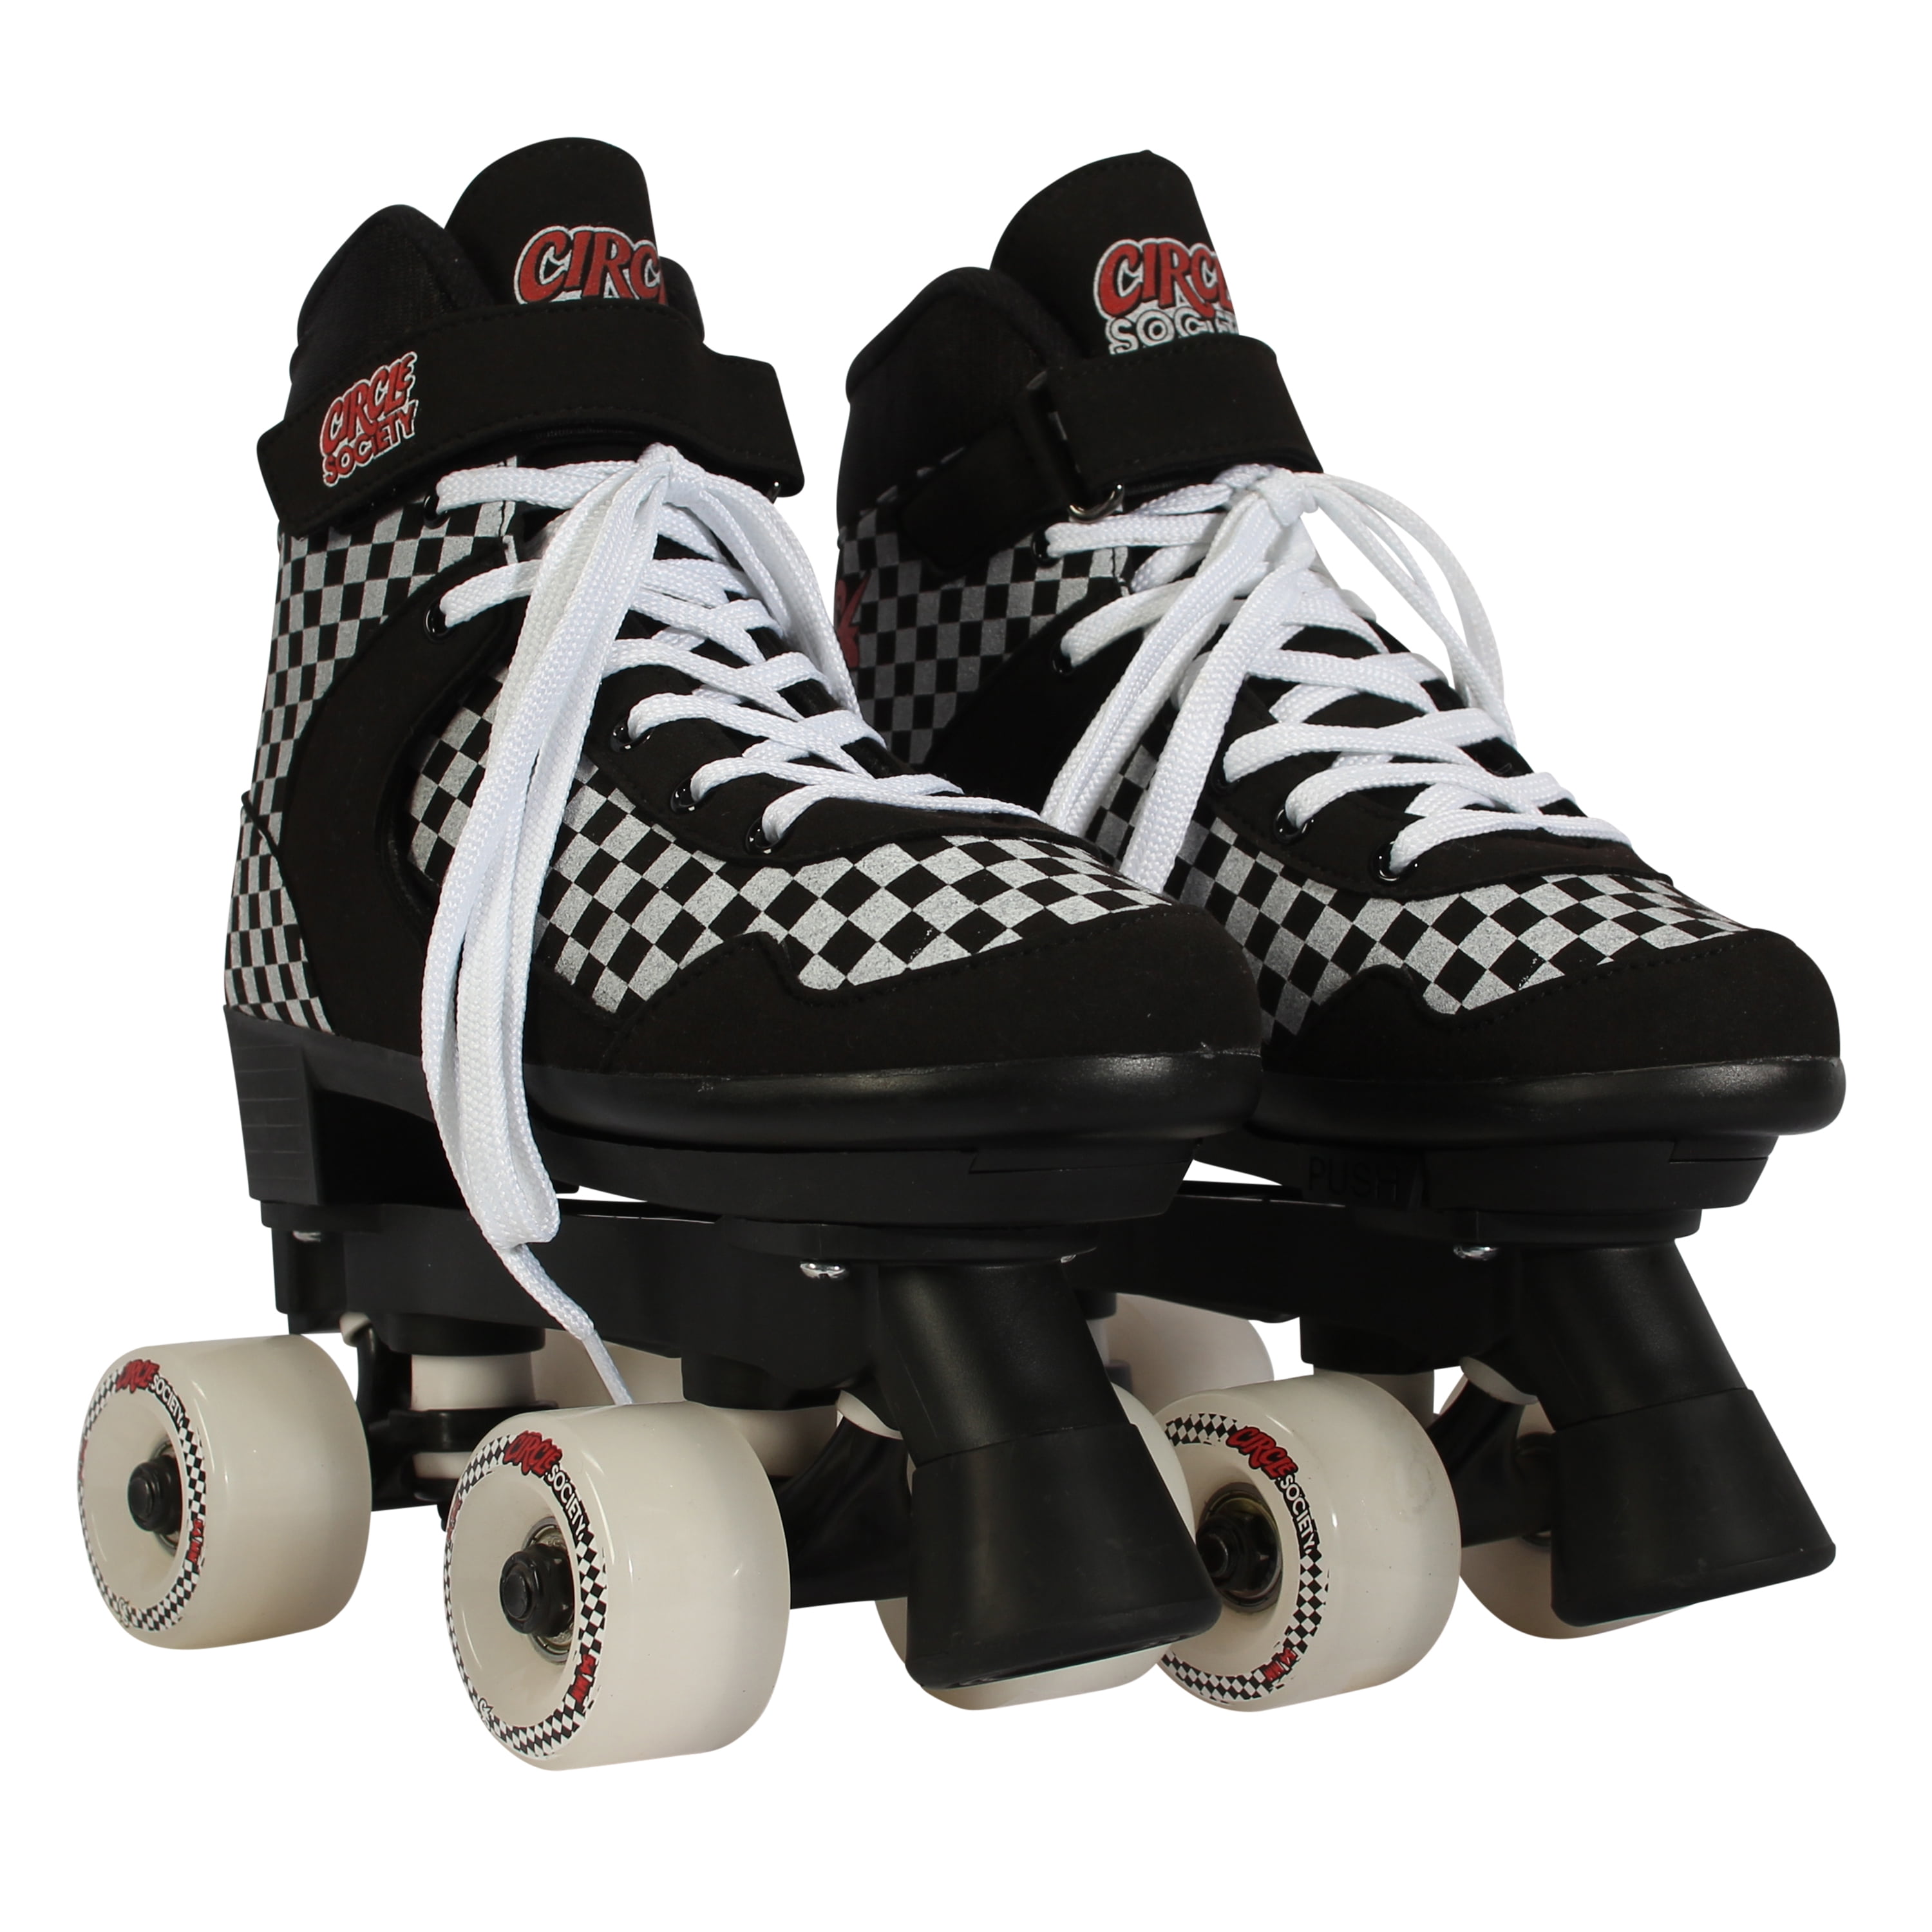 Circle Society Classic Adjustable Indoor and Outdoor Childrens Roller Skates 